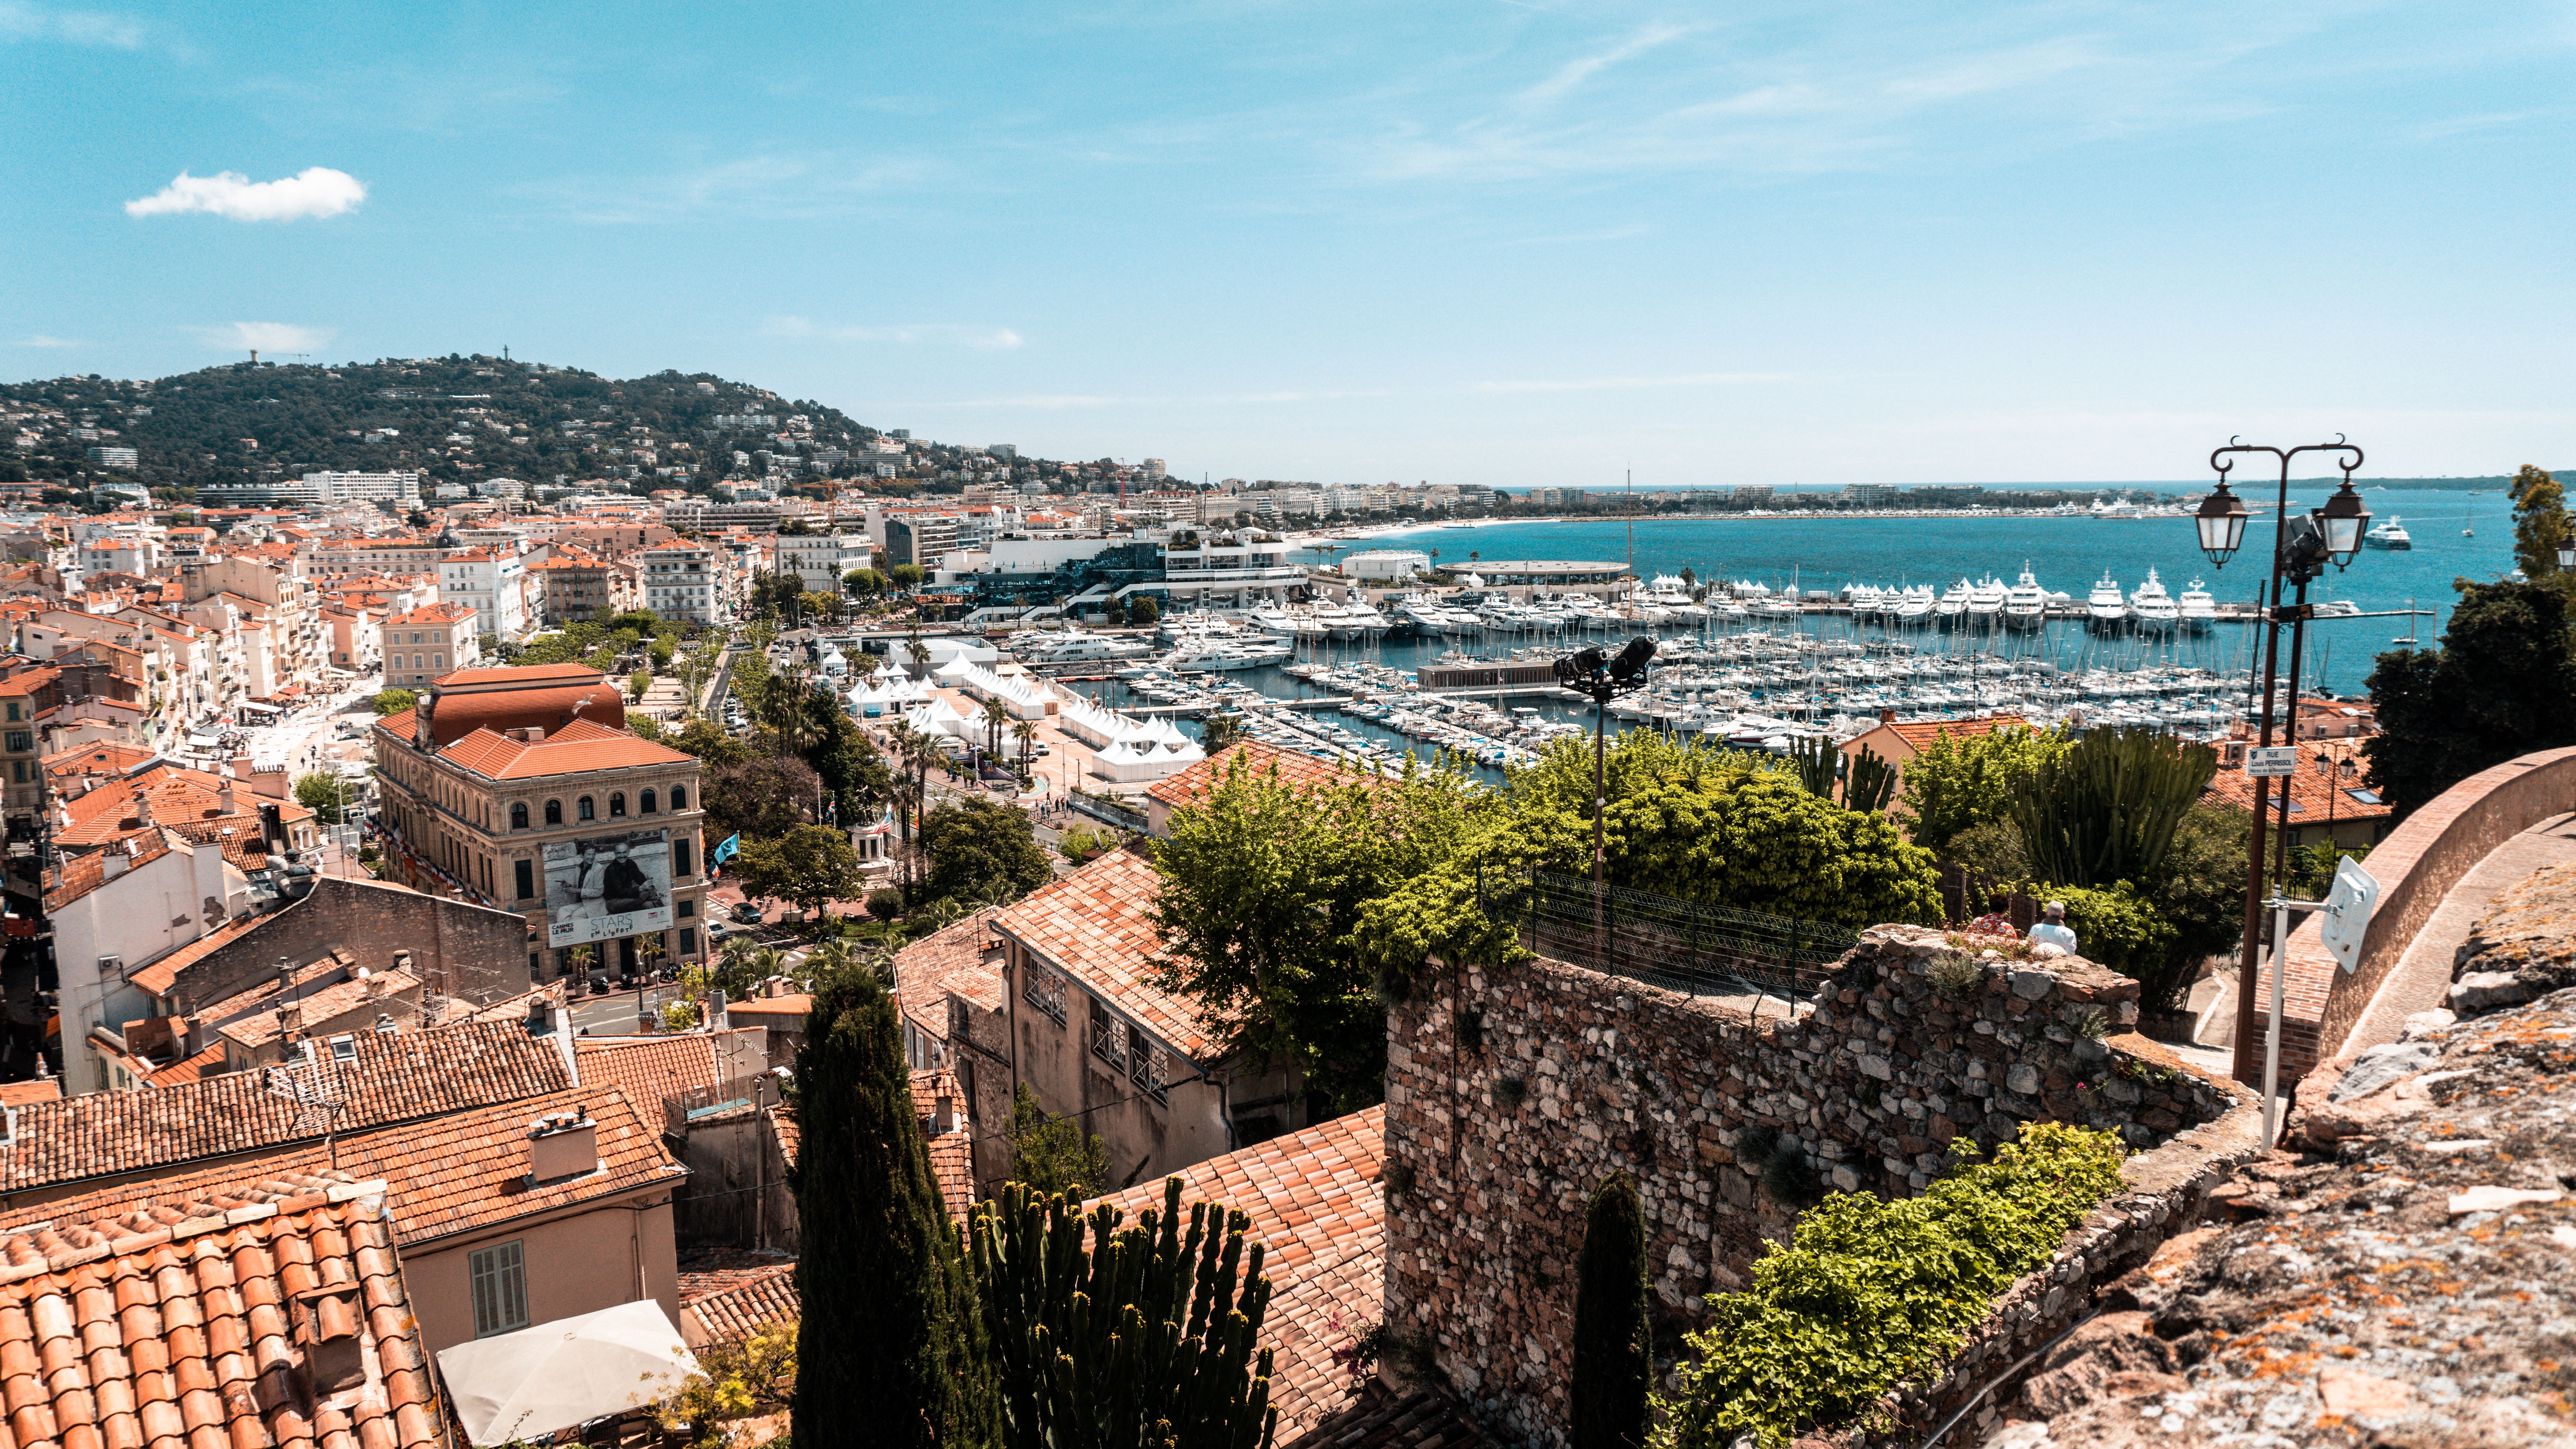 View of neighborhood and water in Cannes, France.